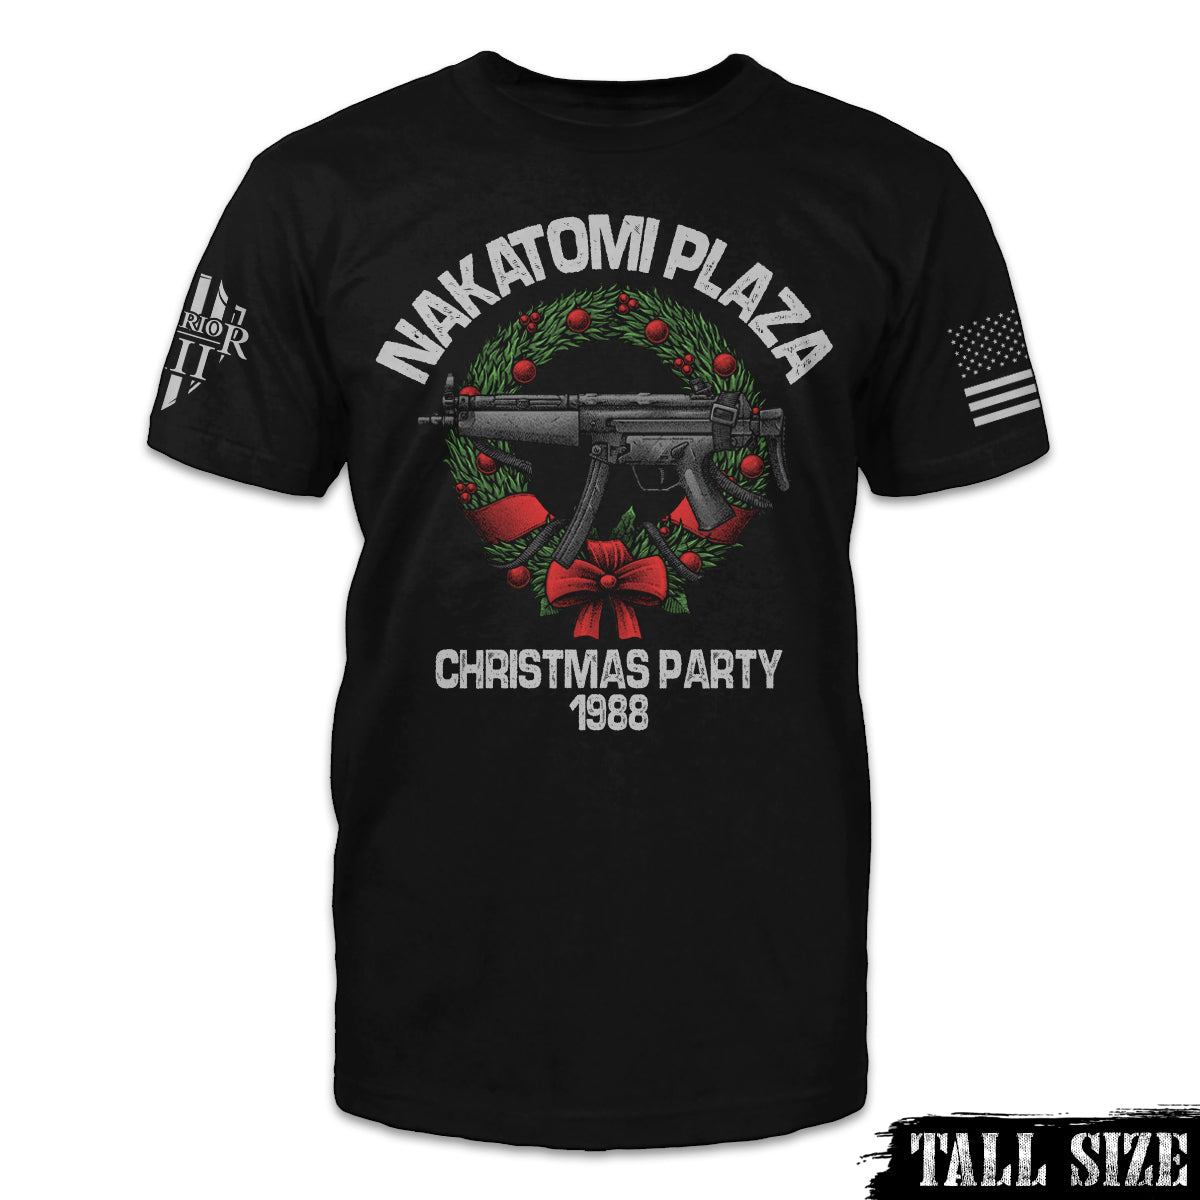 A black tall size shirt with the words "Nakatomi Plaza Christmas Party - 1988" with a gun inside a reef printed on the front of the shirt.